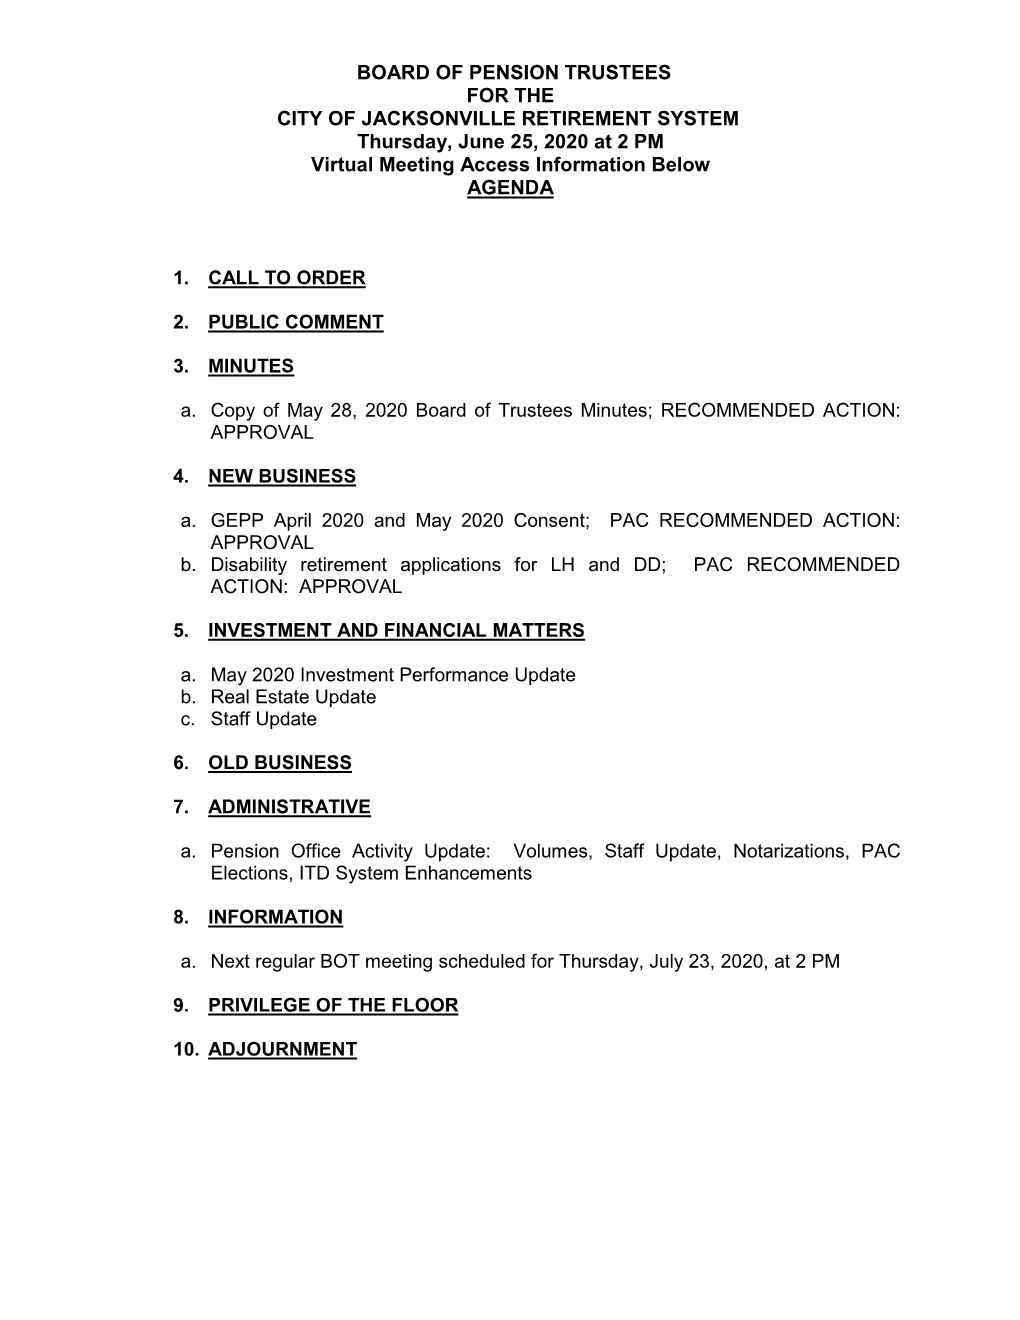 BOARD of PENSION TRUSTEES for the CITY of JACKSONVILLE RETIREMENT SYSTEM Thursday, June 25, 2020 at 2 PM Virtual Meeting Access Information Below AGENDA